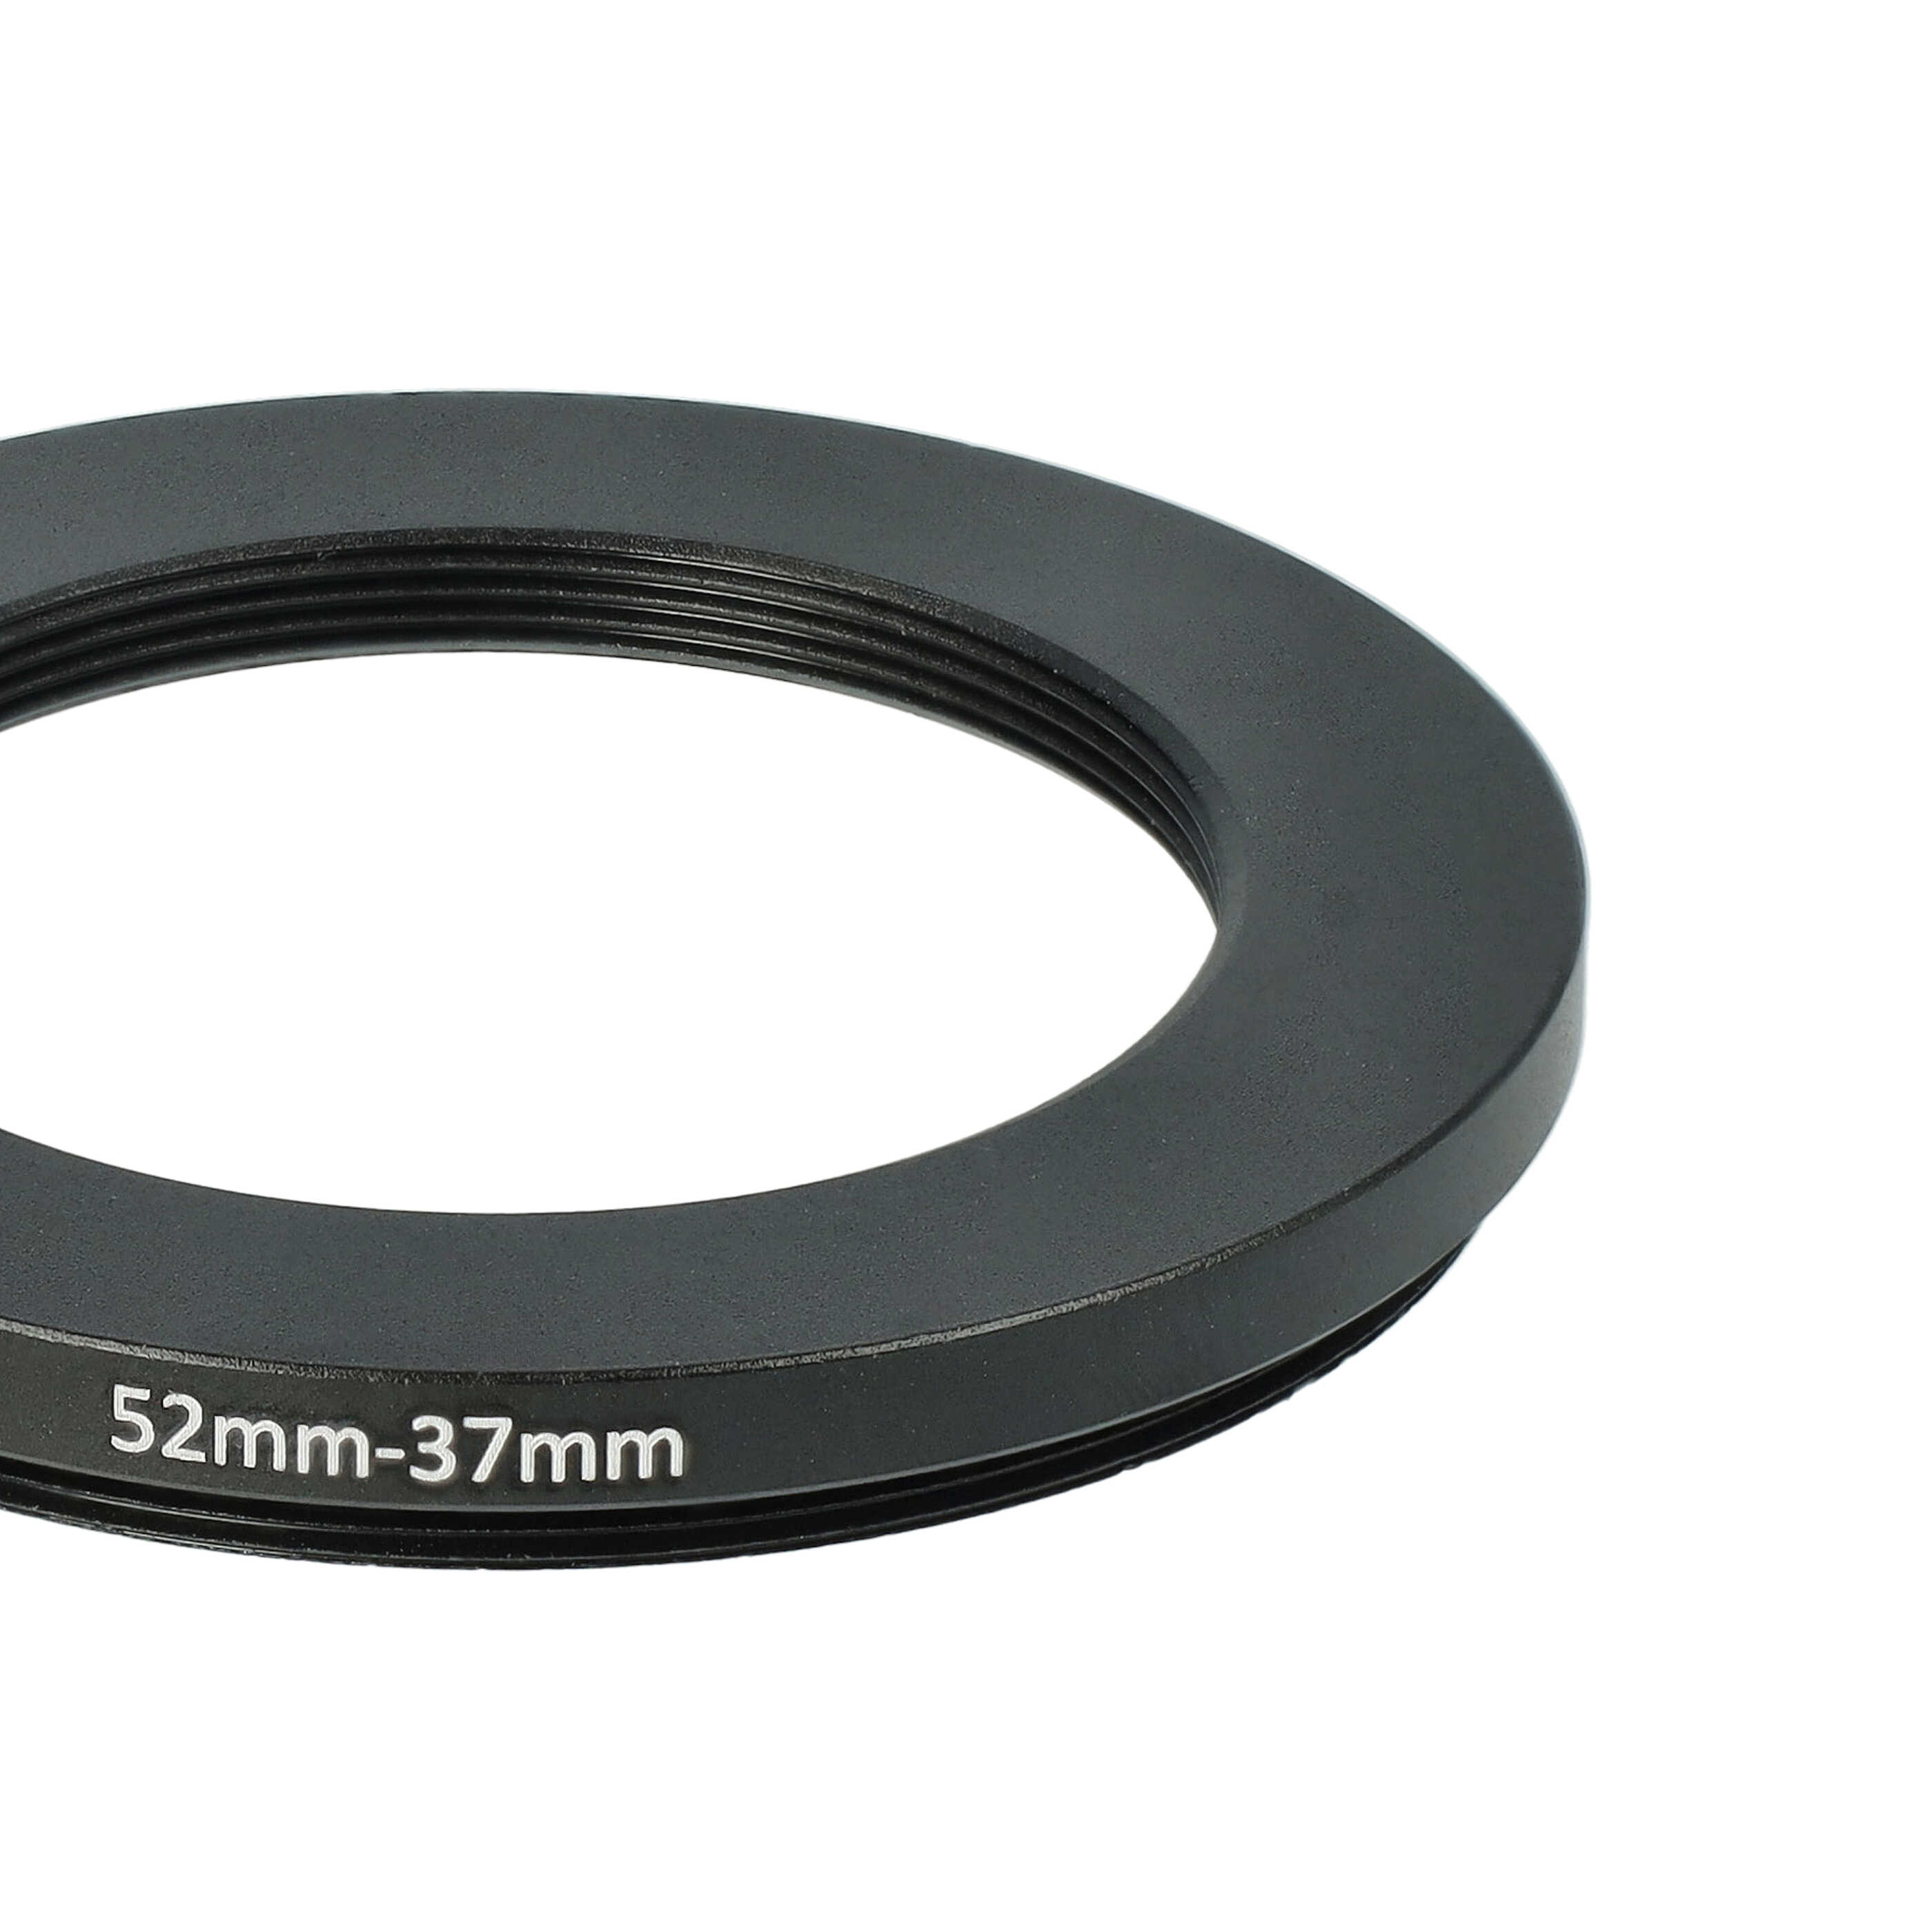 Step-Down Ring Adapter from 52 mm to 37 mm suitable for Camera Lens - Filter Adapter, metal